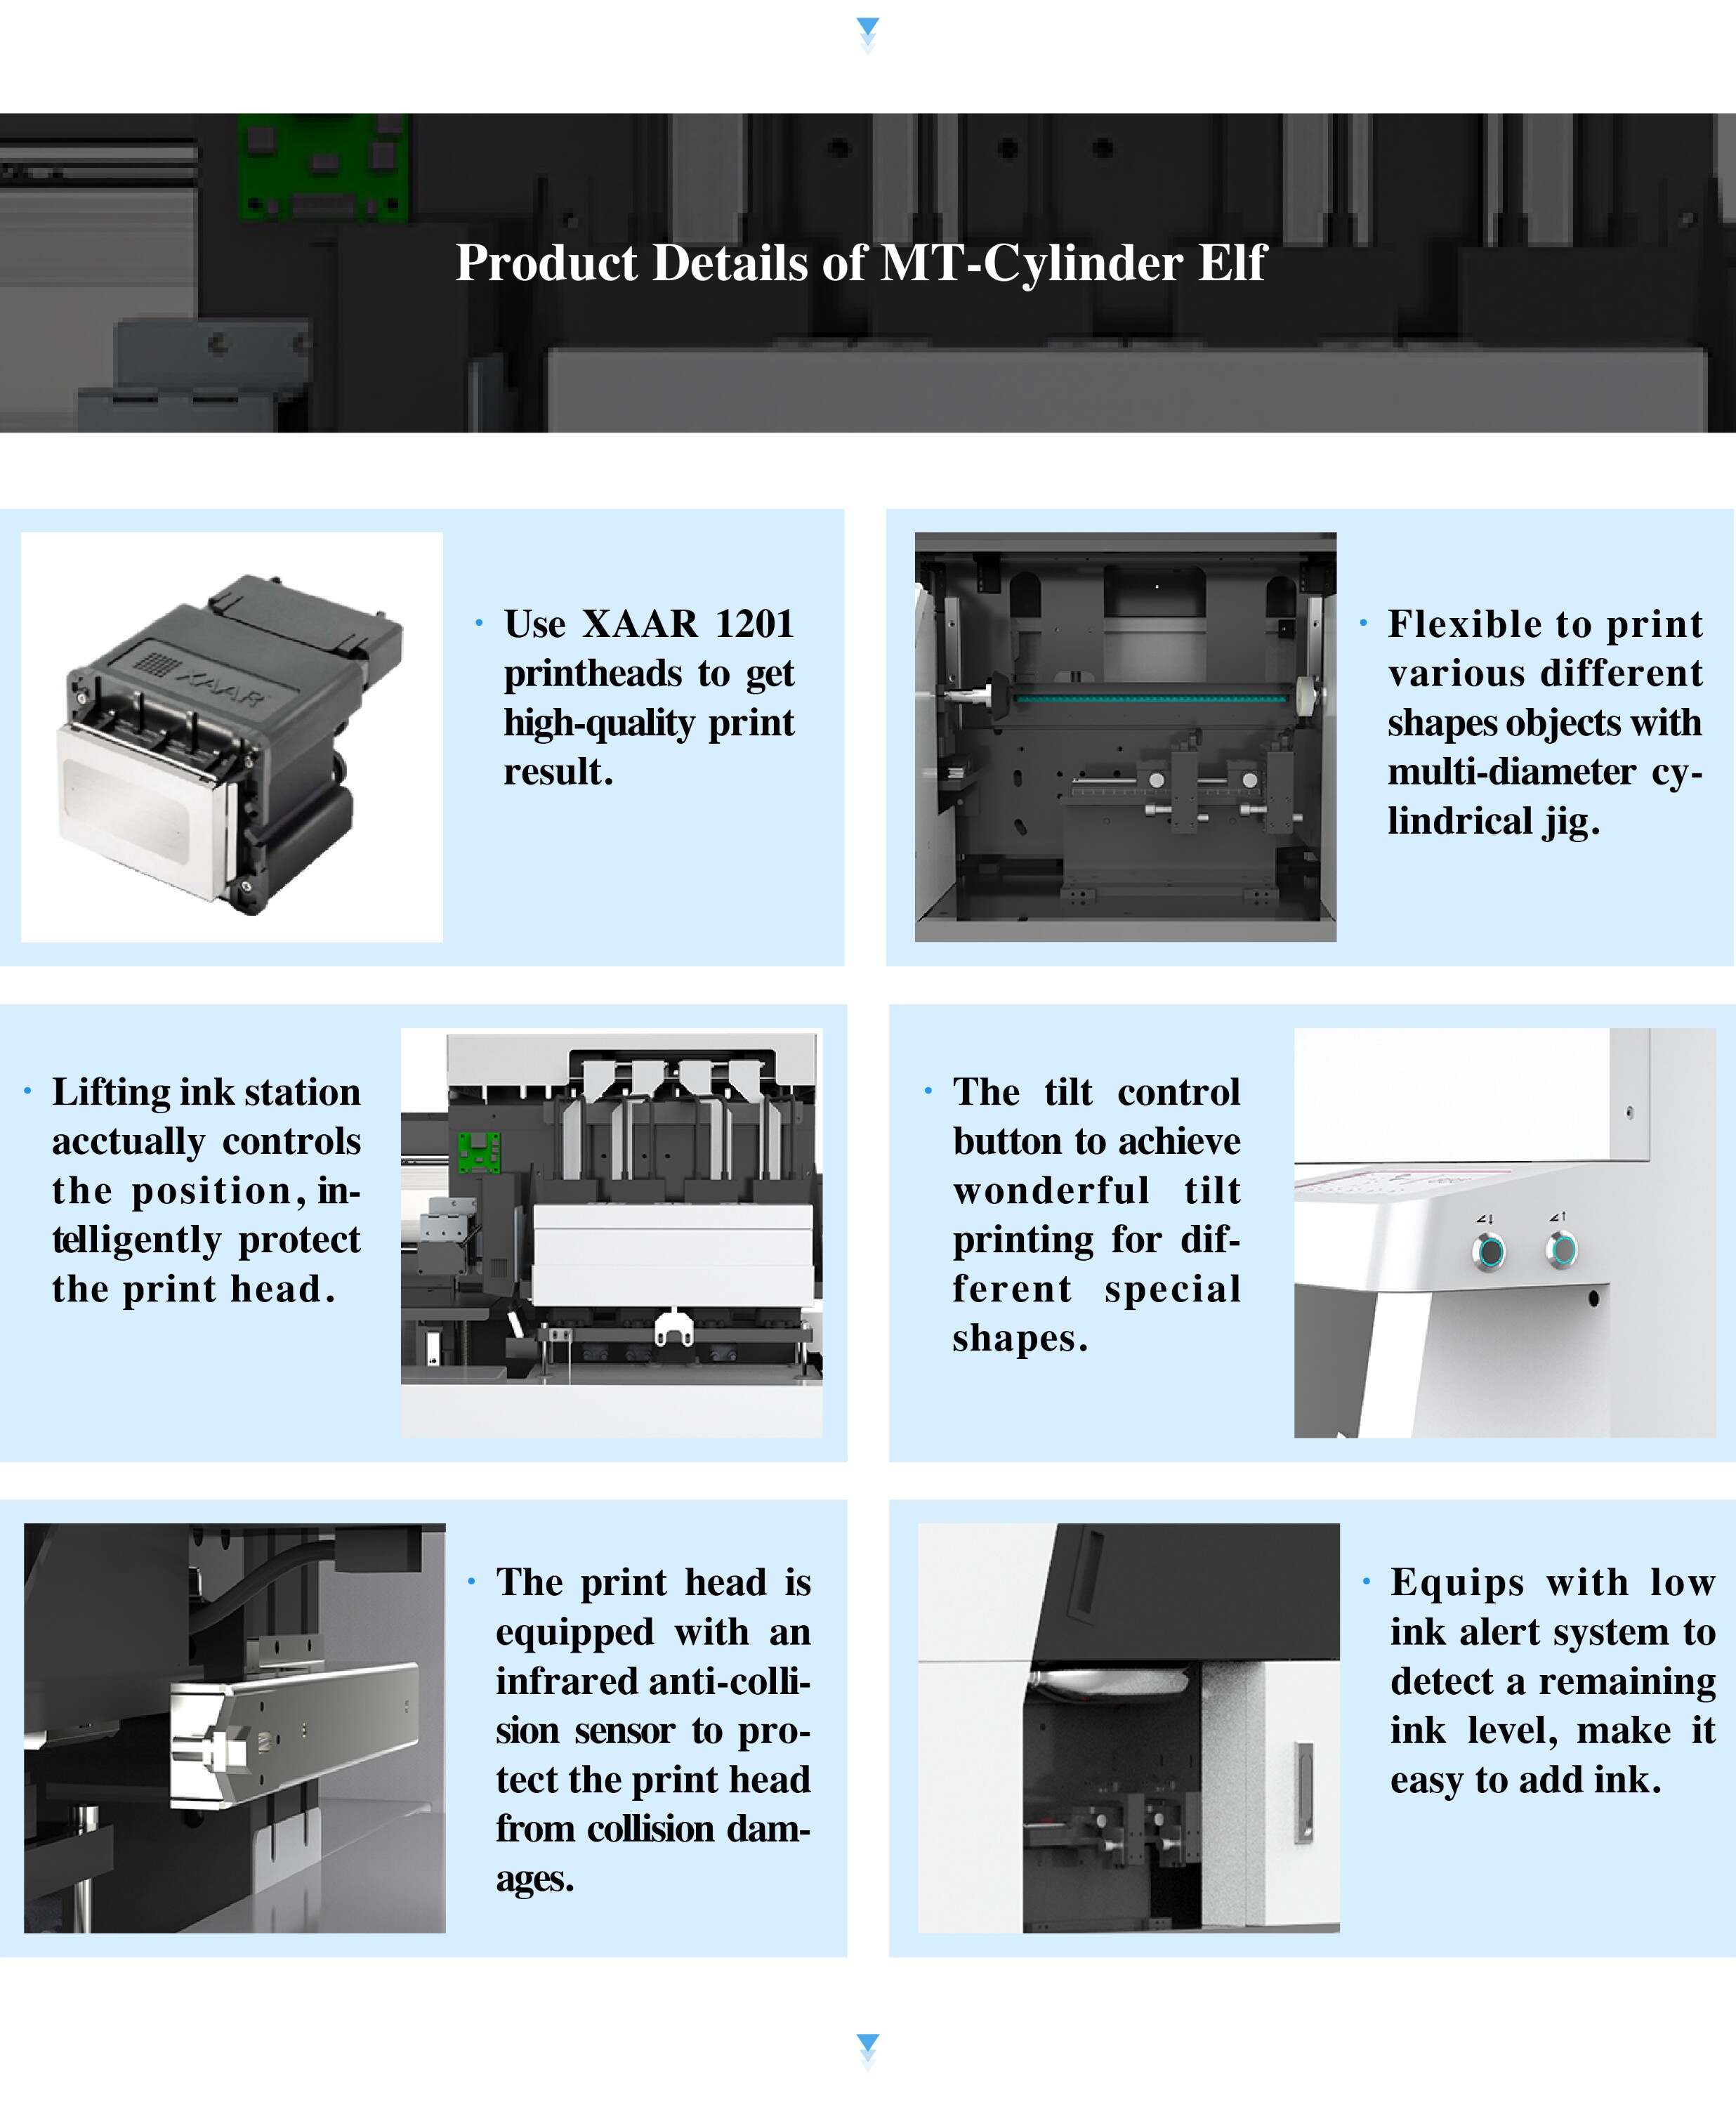 Product Details of 360 Rotary UV Printer MT-Cylinder Elf